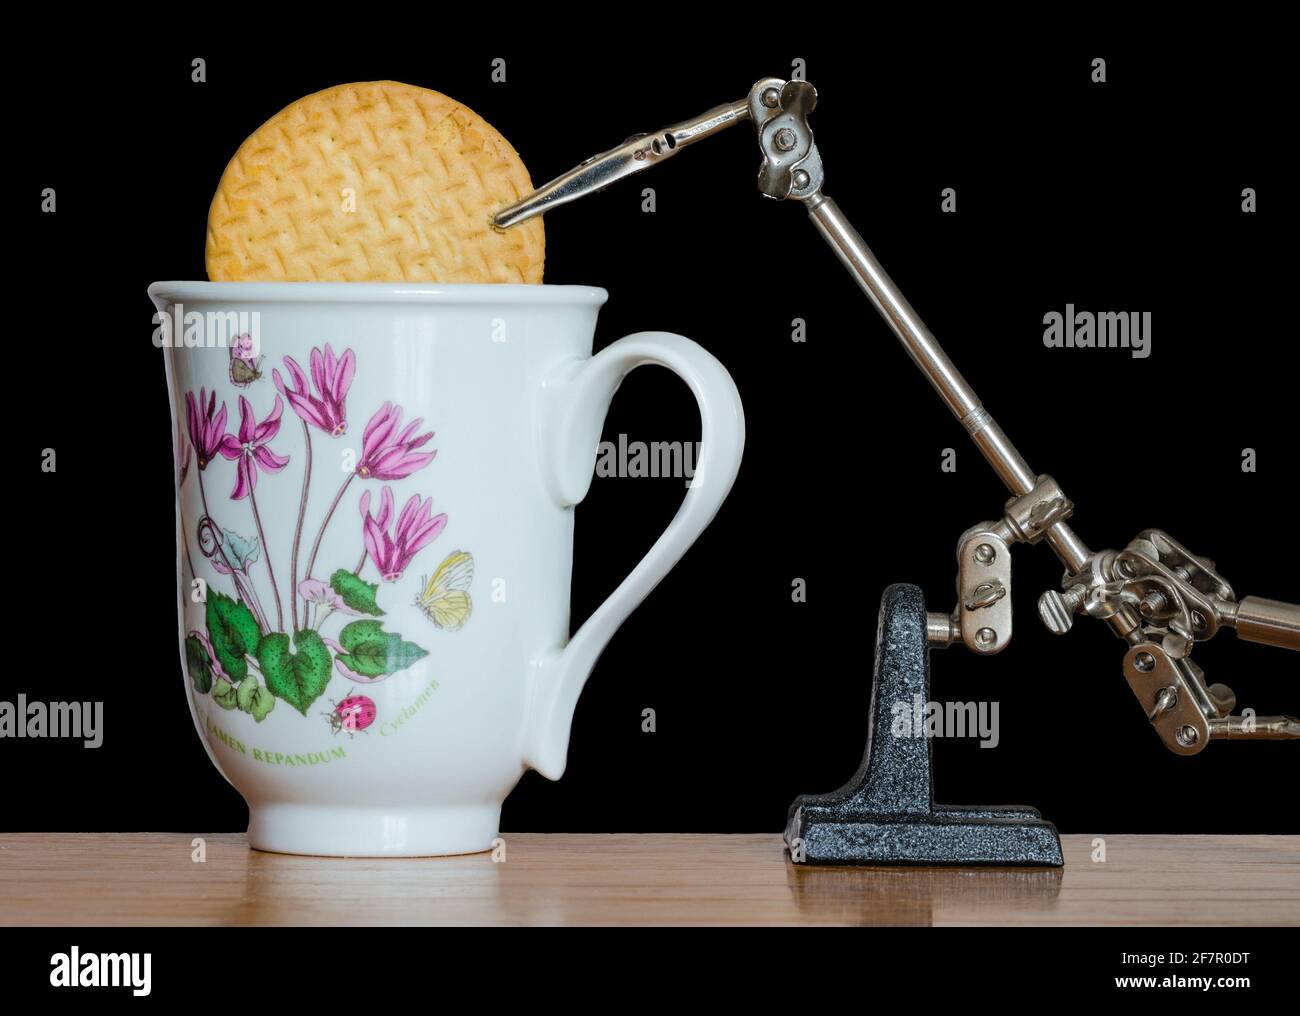 Robot arm dunking a biscuit in coffee. Example of a stupid, silly, crazy and pointless invention of a useless machine. Stock Photo